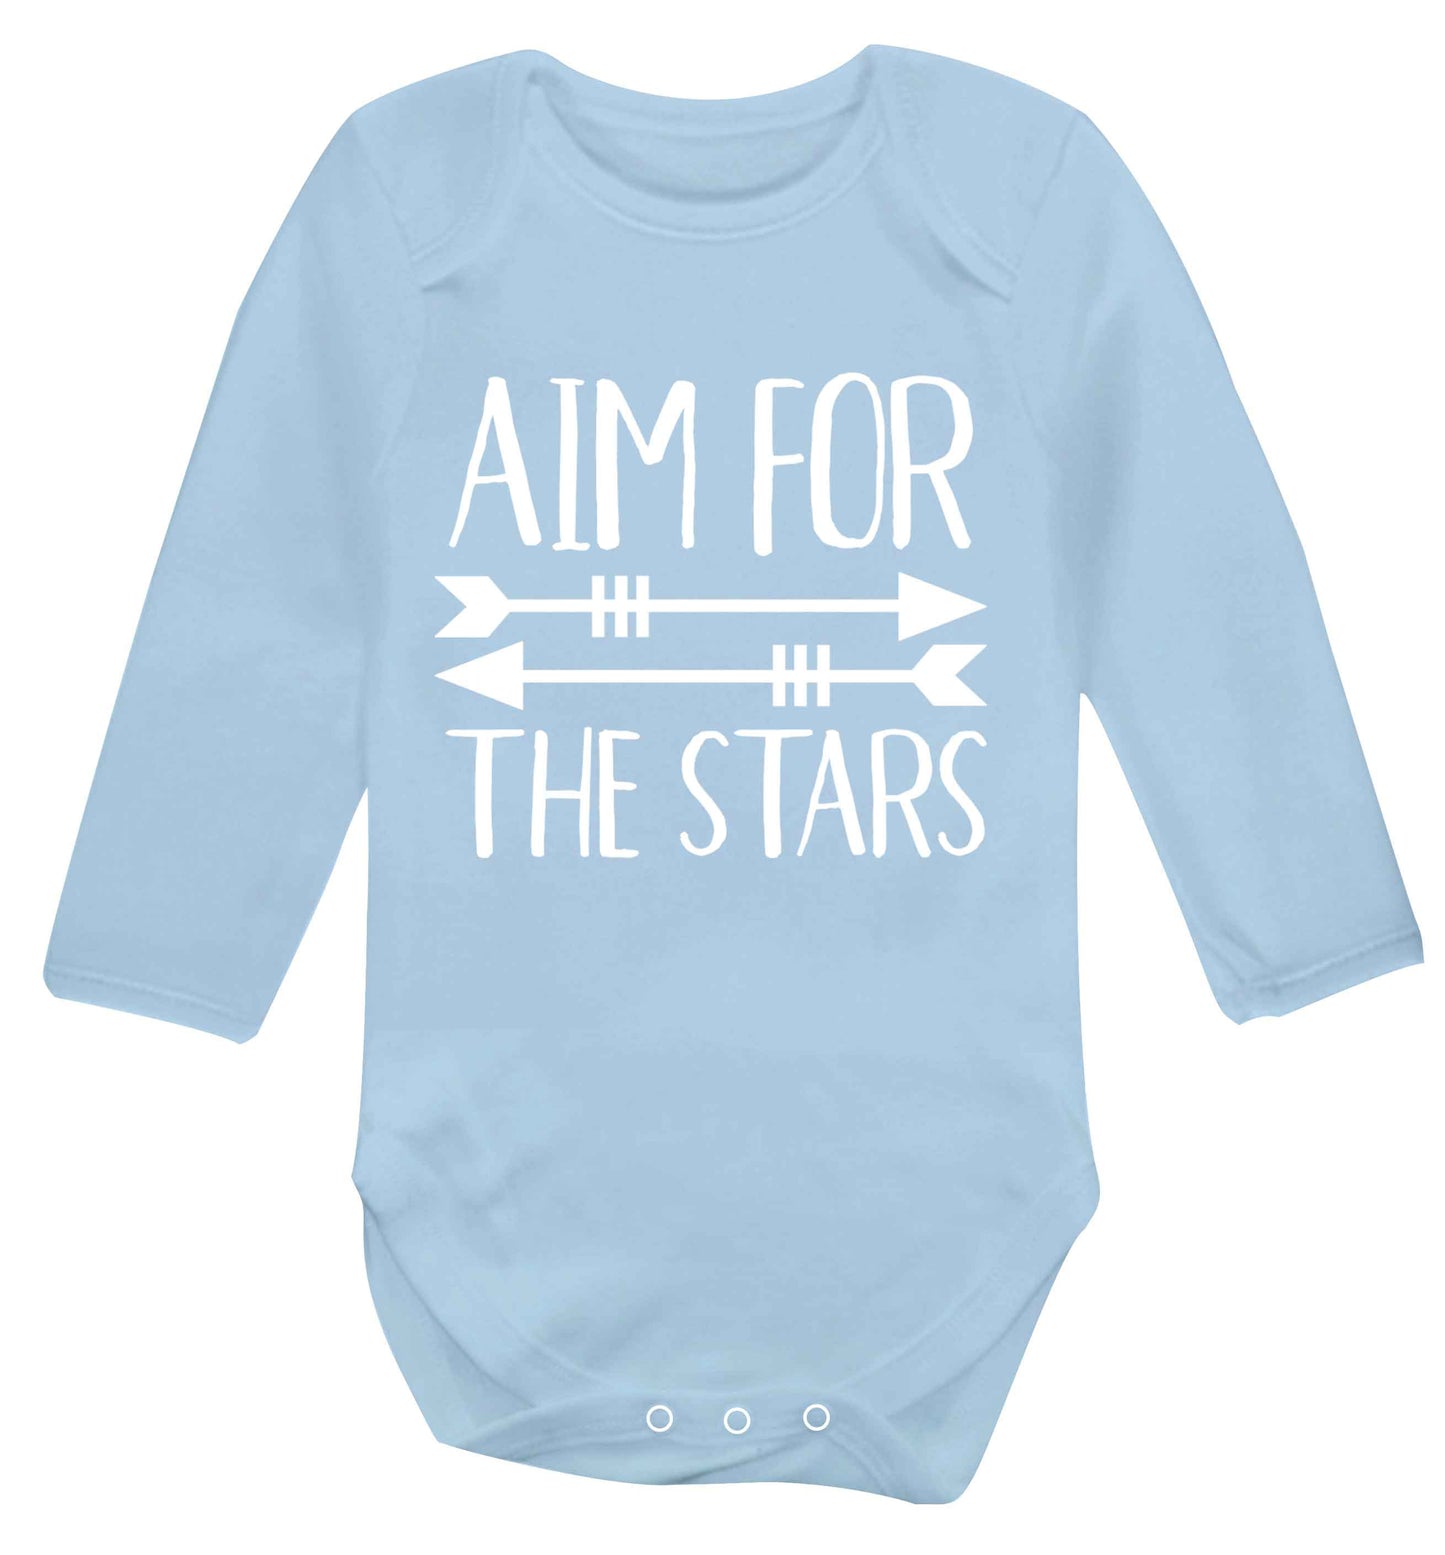 Aim for the stars Baby Vest long sleeved pale blue 6-12 months